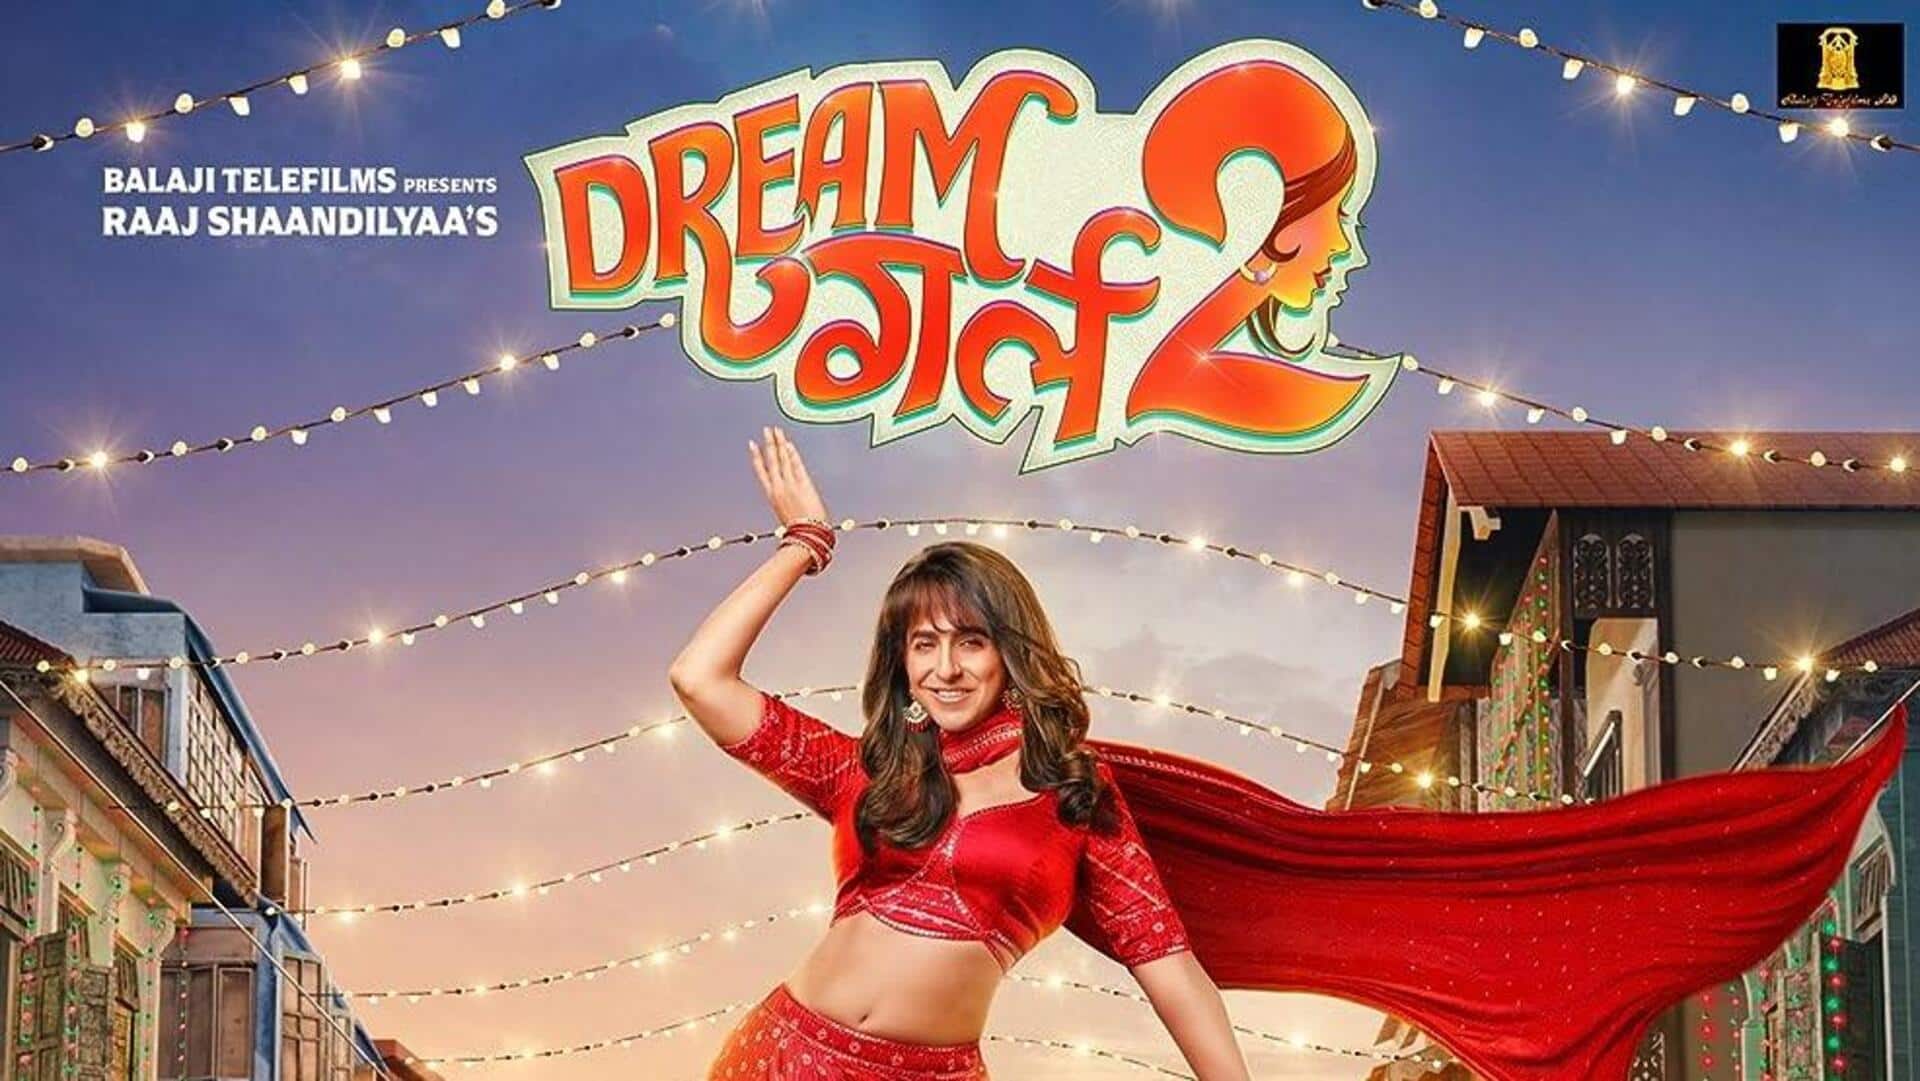 Box office collection: 'Dream Girl 2' shows negligible growth